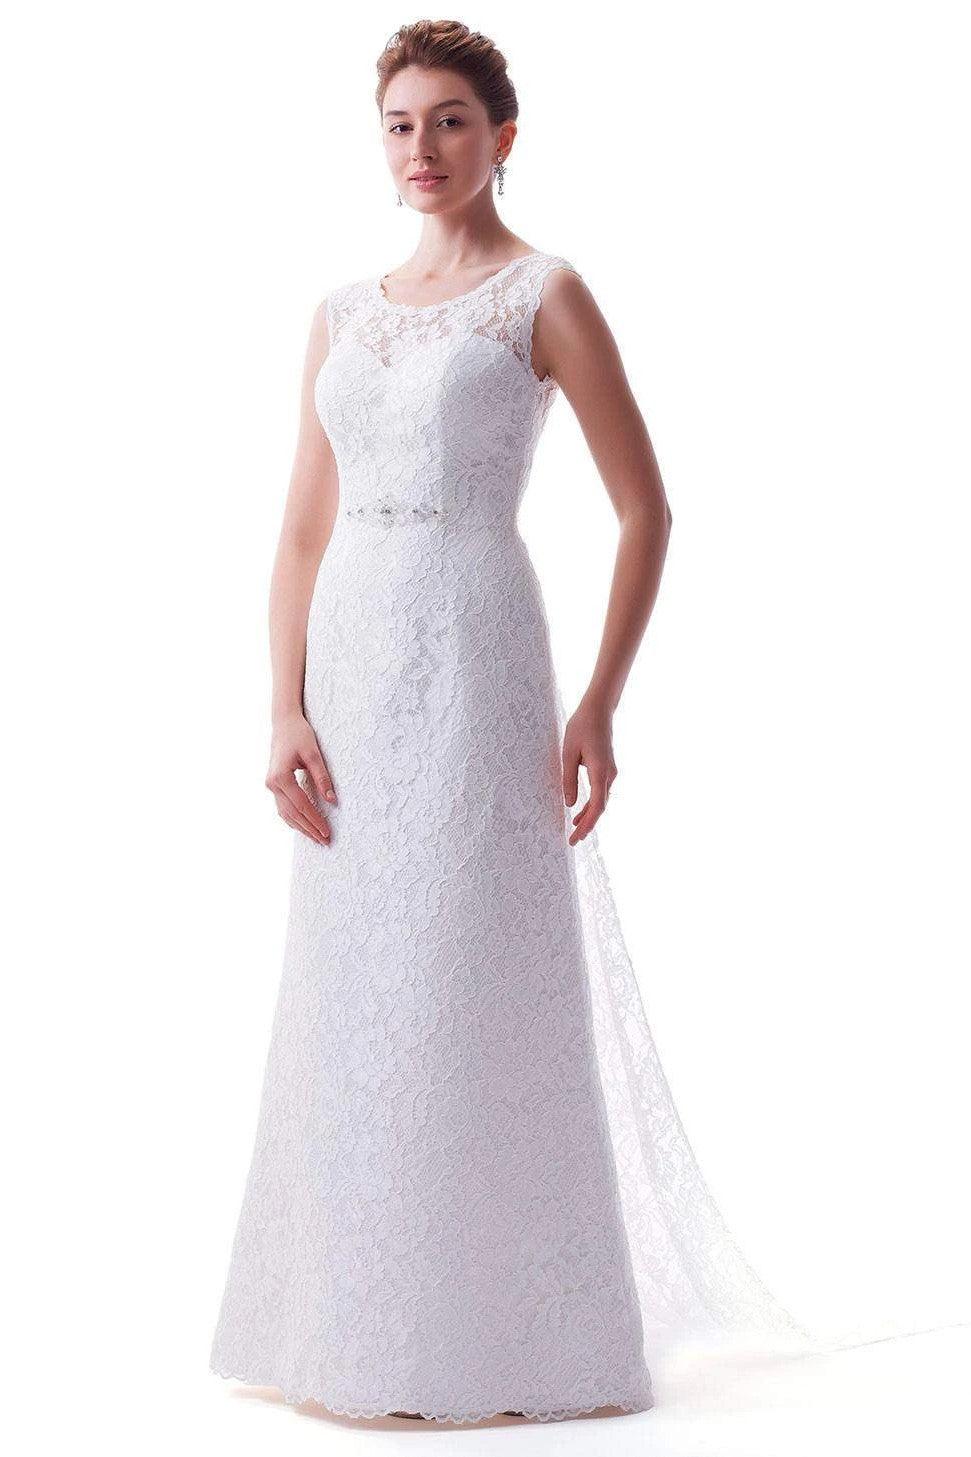 UK10 CAROLINE 40% OFF/ WAS £495/NOW - Adore Bridal and Occasion Wear